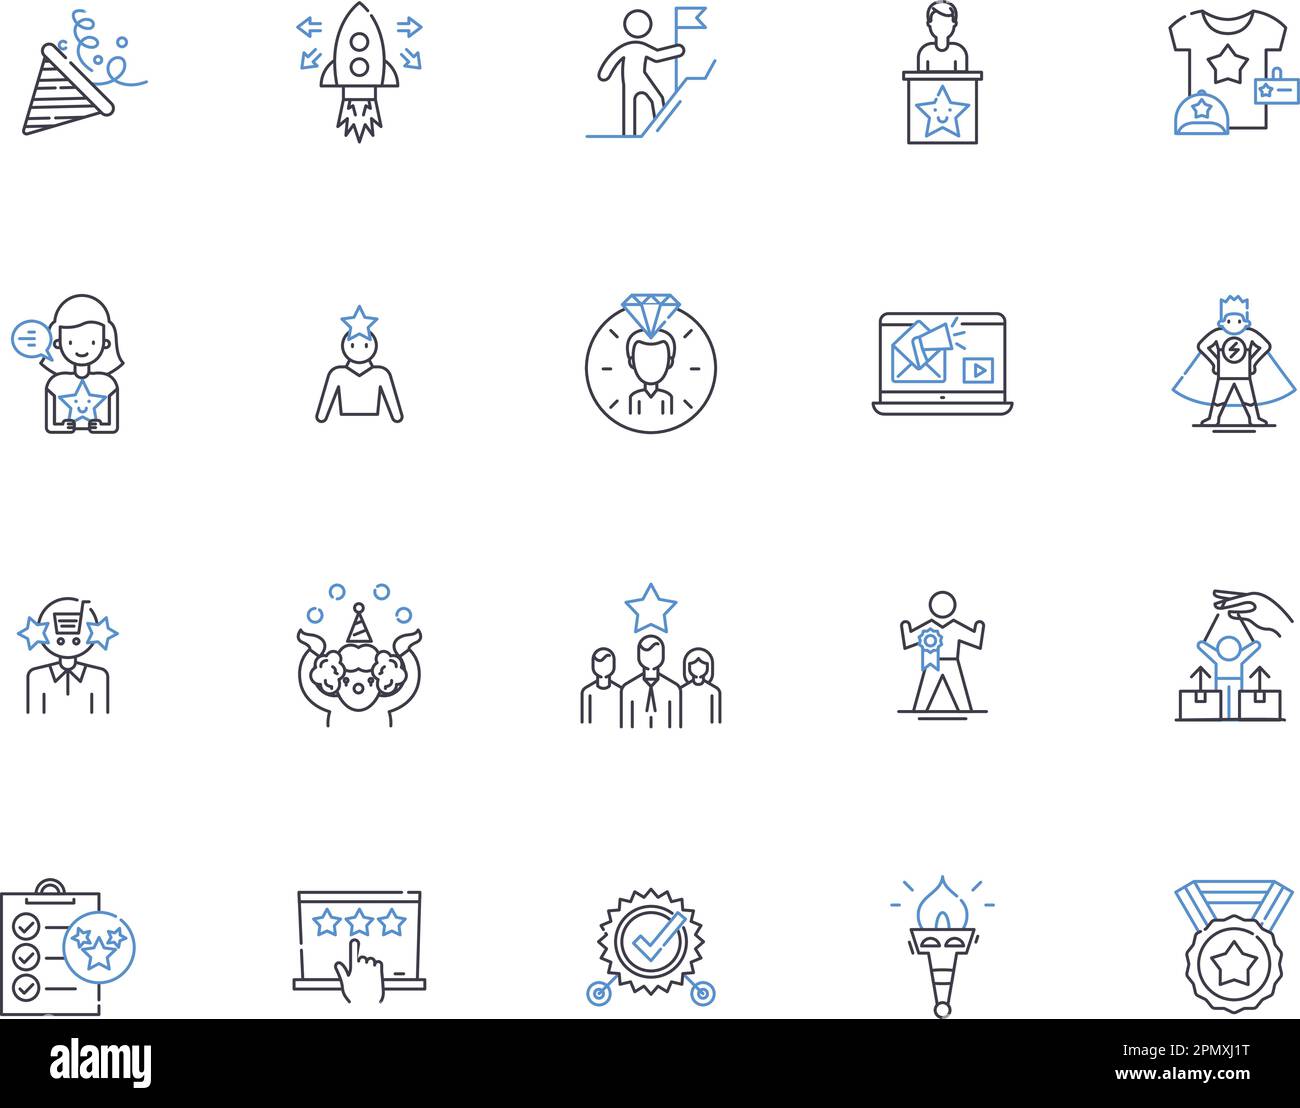 Success outline icons collection. Achievement, Fulfillment, Accomplishment, Victory, Triumph, Excellence, Outcome vector and illustration concept set Stock Vector